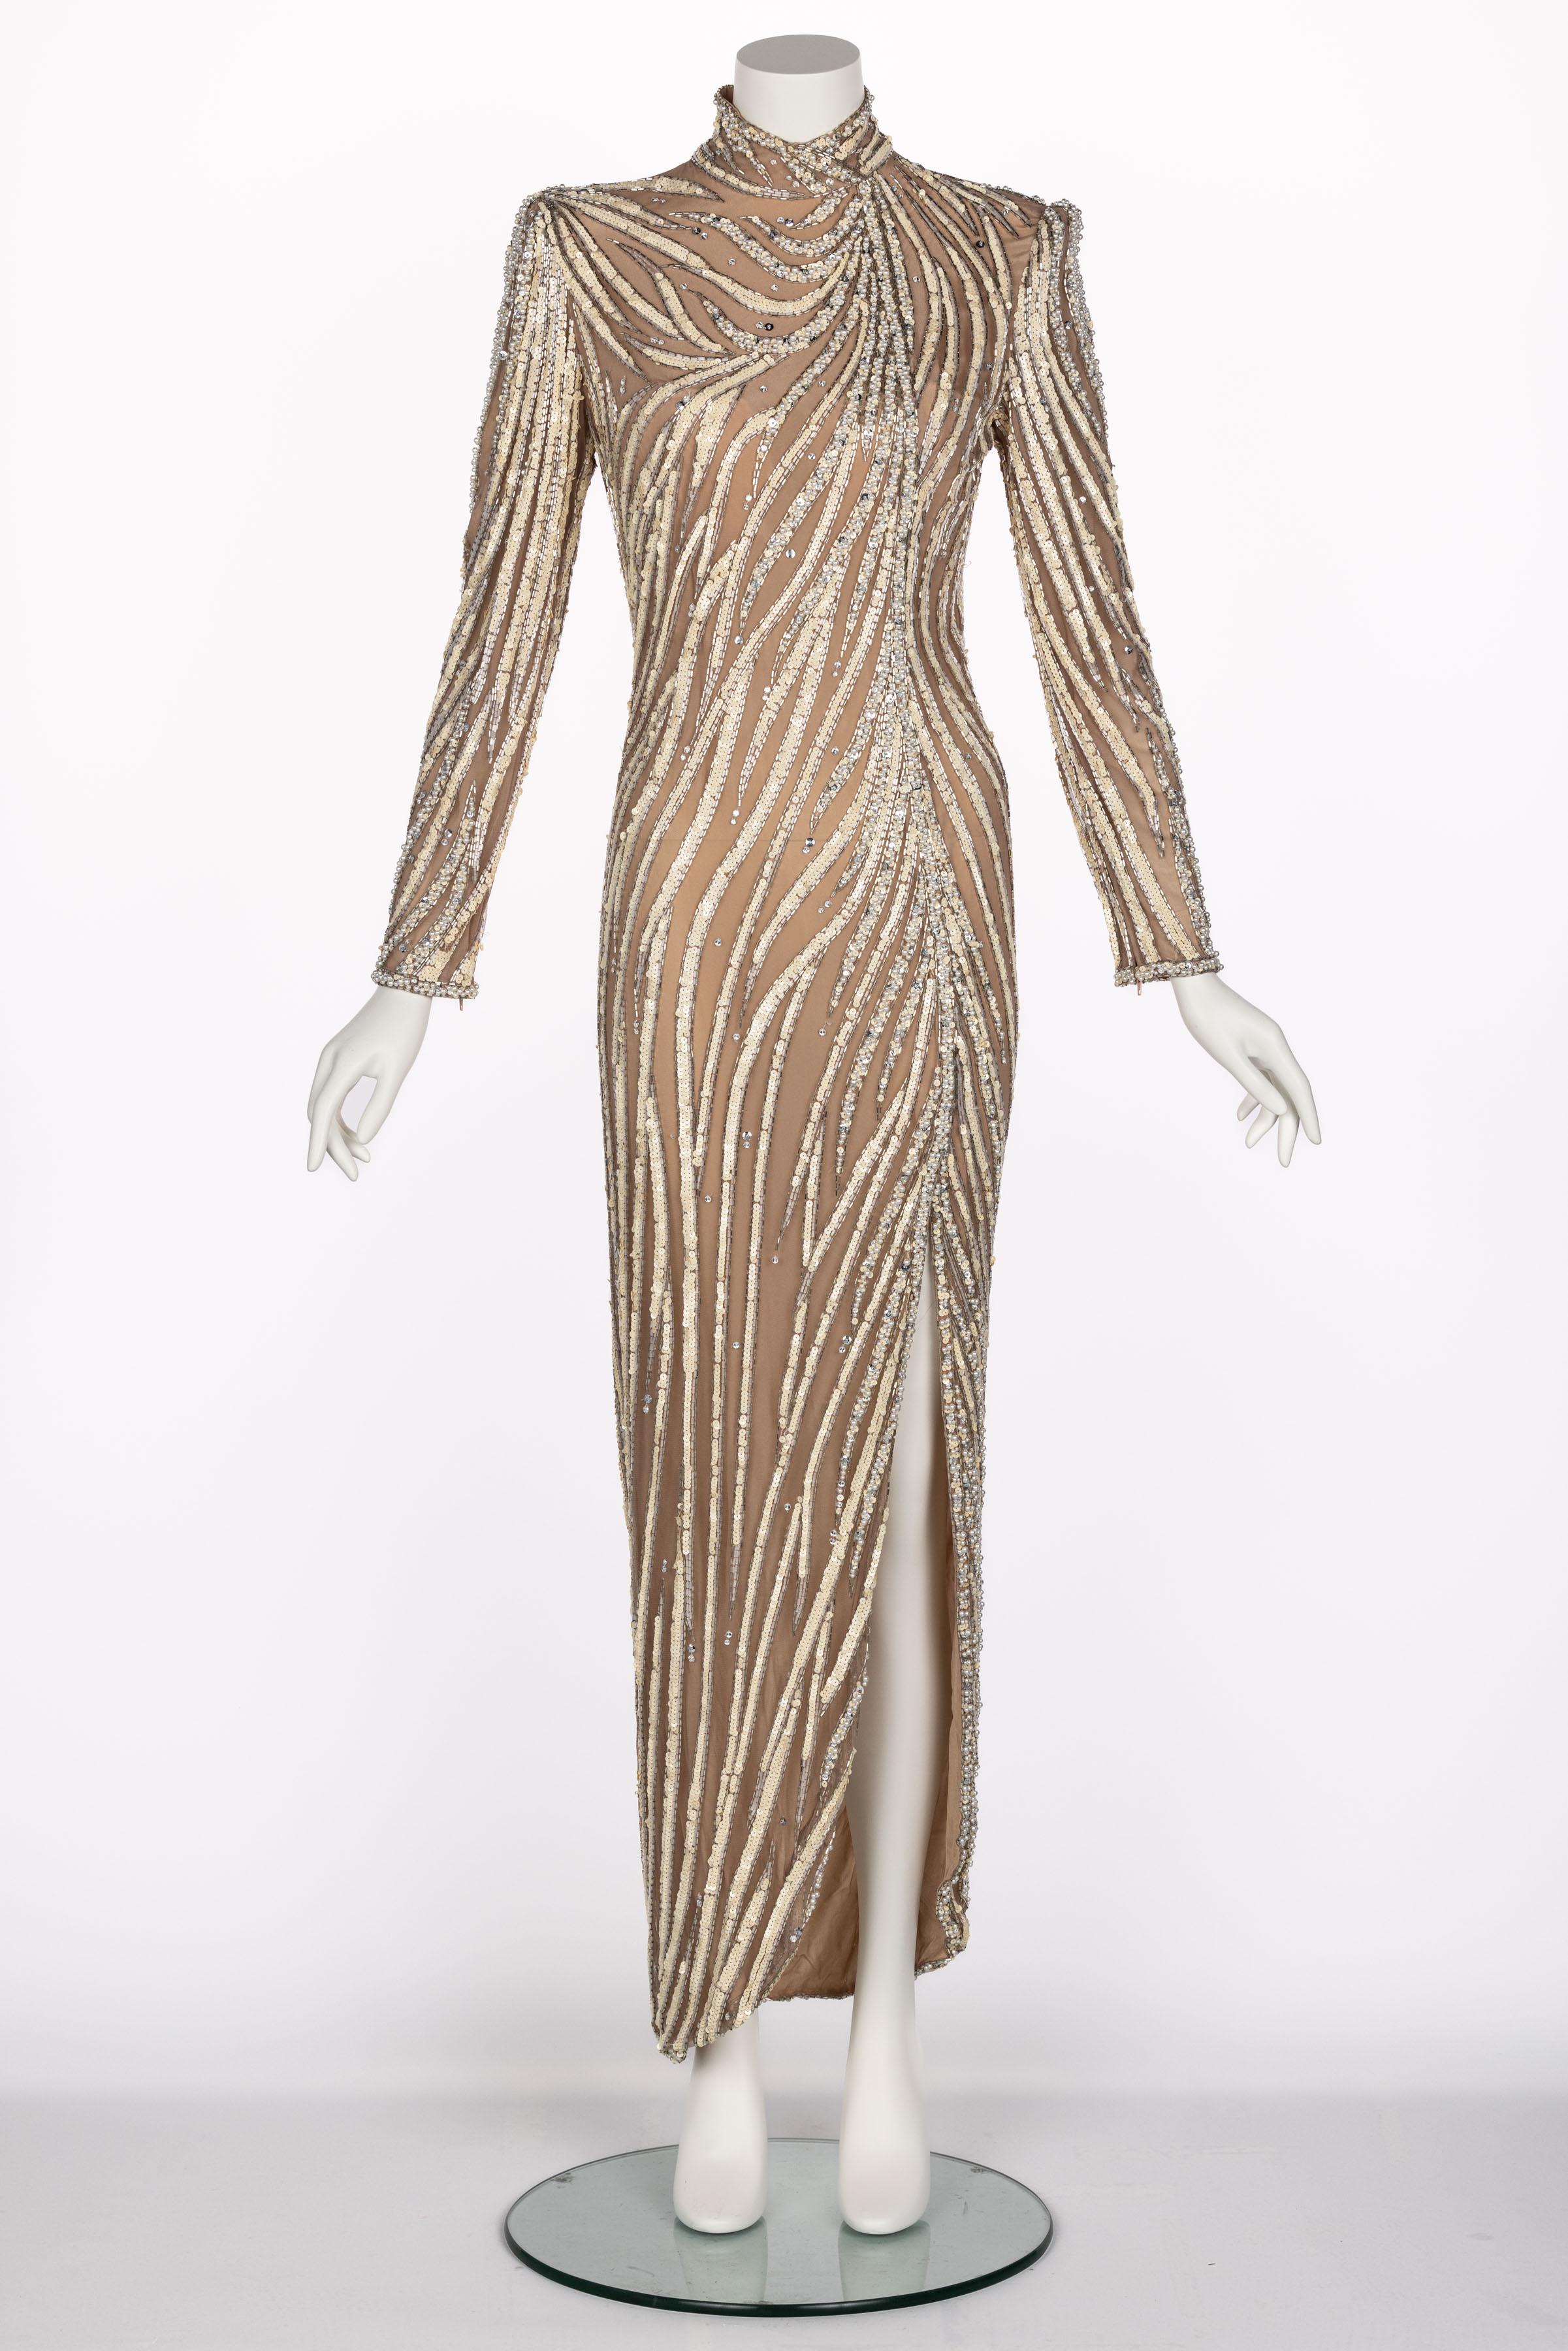 Bob Mackie is commonly regarded as one of the world’s most prolific costume designers with his designs gracing stages and screens all over the globe. He famously designed for the likes of Cher and Diana Ross, and his designs continue to serve as